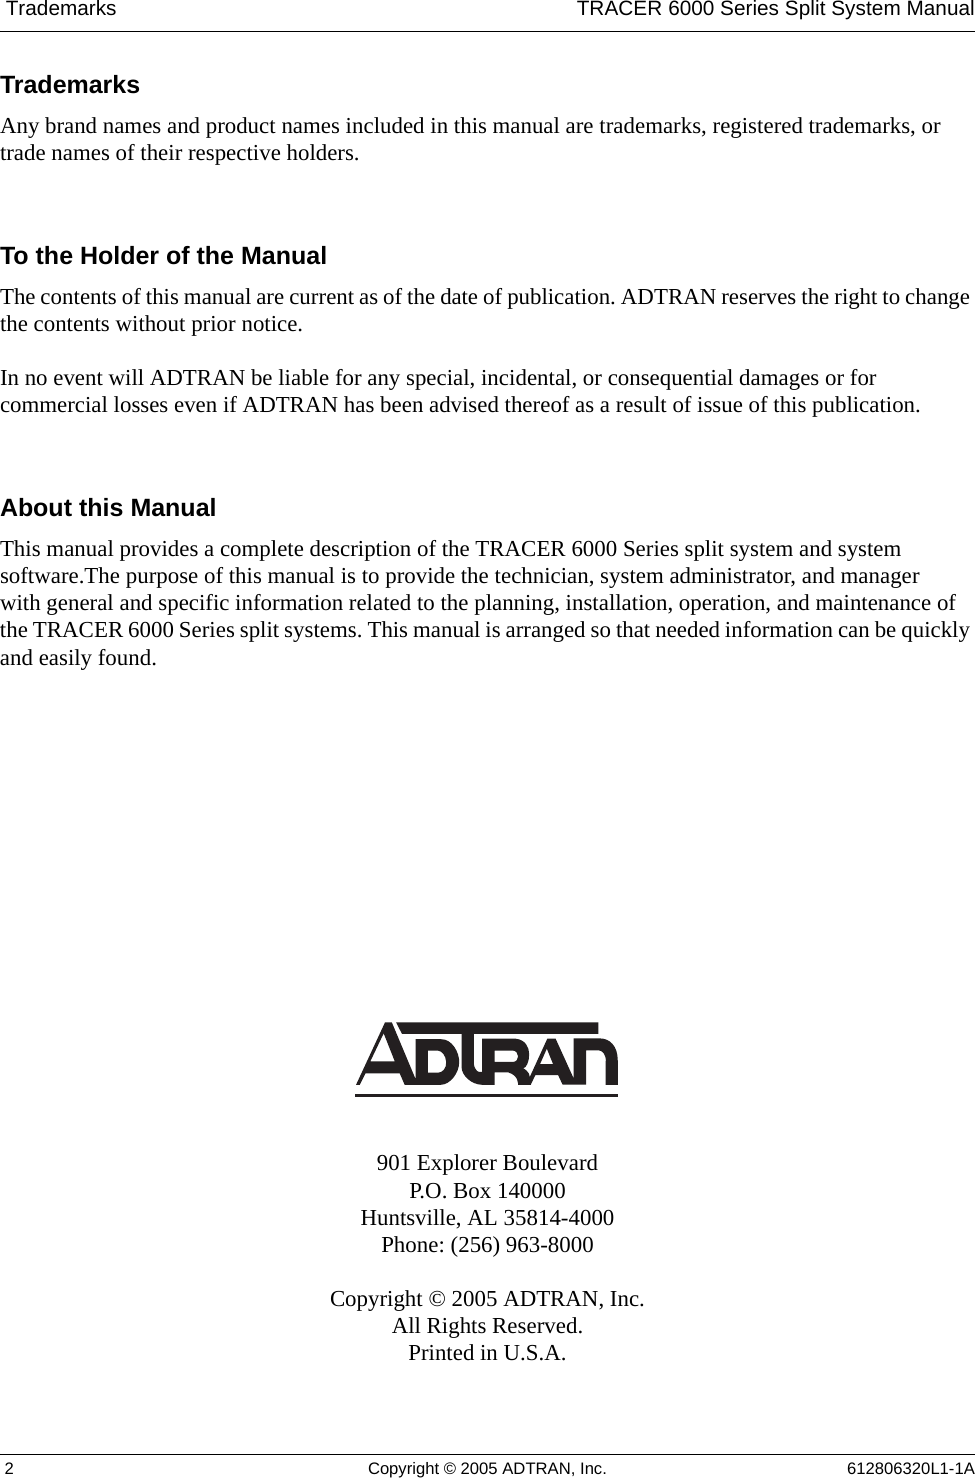  Trademarks TRACER 6000 Series Split System Manual 2 Copyright © 2005 ADTRAN, Inc. 612806320L1-1ATrademarksAny brand names and product names included in this manual are trademarks, registered trademarks, or trade names of their respective holders.To the Holder of the ManualThe contents of this manual are current as of the date of publication. ADTRAN reserves the right to change the contents without prior notice.In no event will ADTRAN be liable for any special, incidental, or consequential damages or for commercial losses even if ADTRAN has been advised thereof as a result of issue of this publication.About this ManualThis manual provides a complete description of the TRACER 6000 Series split system and system software.The purpose of this manual is to provide the technician, system administrator, and manager with general and specific information related to the planning, installation, operation, and maintenance of the TRACER 6000 Series split systems. This manual is arranged so that needed information can be quickly and easily found. 901 Explorer BoulevardP.O. Box 140000Huntsville, AL 35814-4000Phone: (256) 963-8000Copyright © 2005 ADTRAN, Inc.All Rights Reserved.Printed in U.S.A.